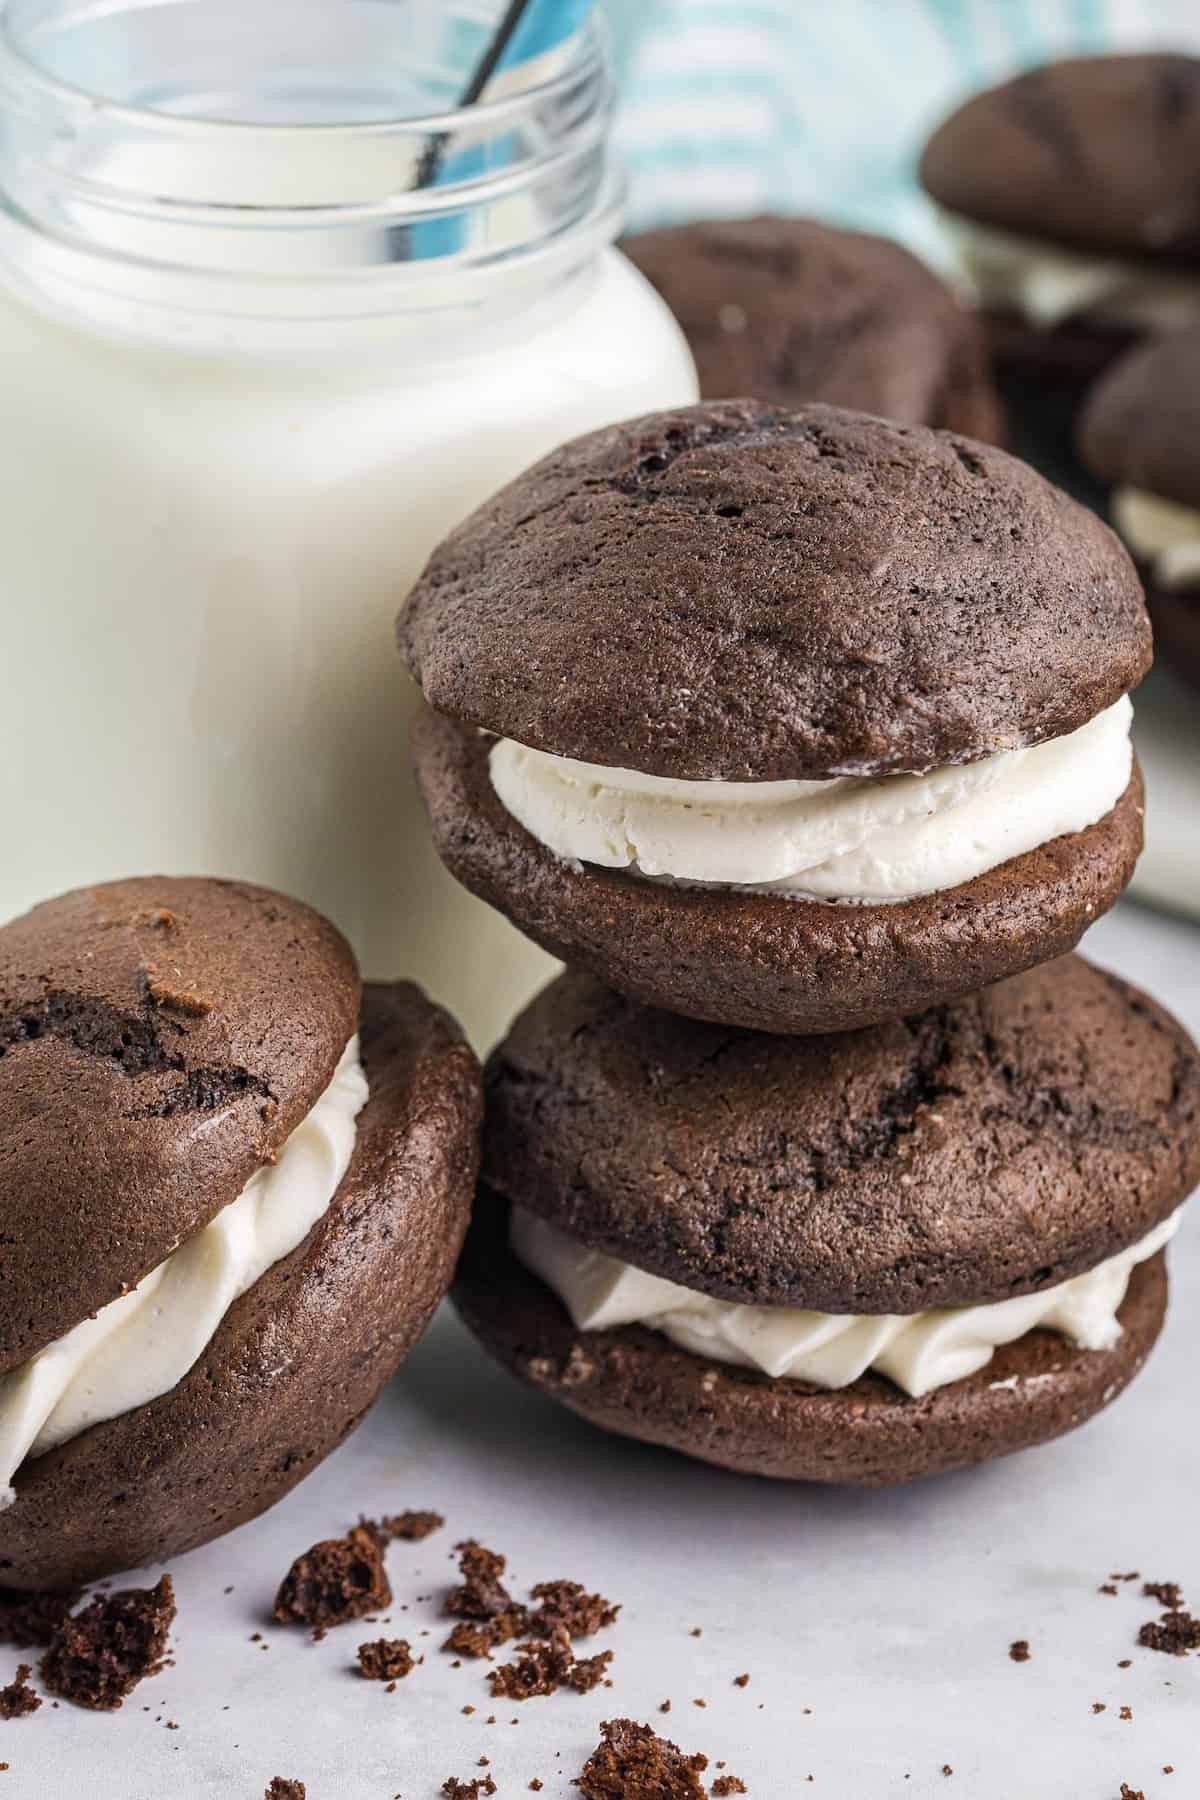 Vertical image of three cake mix whoopie pies, twos tacked on top of each other next to a glass of milk.